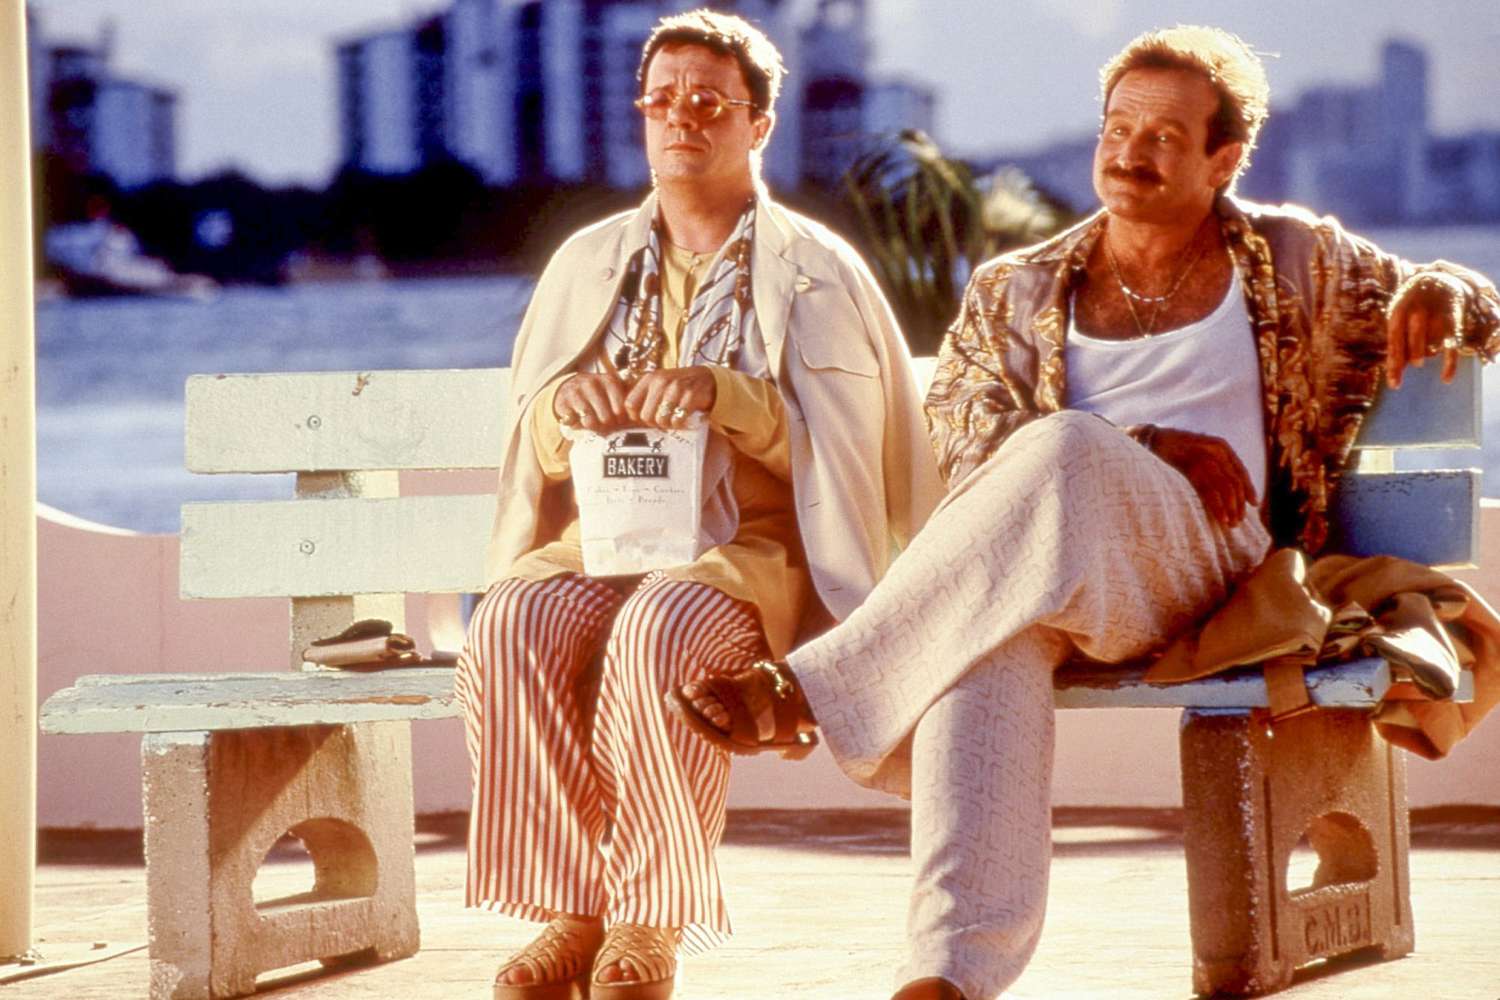 THE BIRDCAGE, Nathan Lane, Robin Williams, 1996, © United Artists / Courtesy Everett Collection